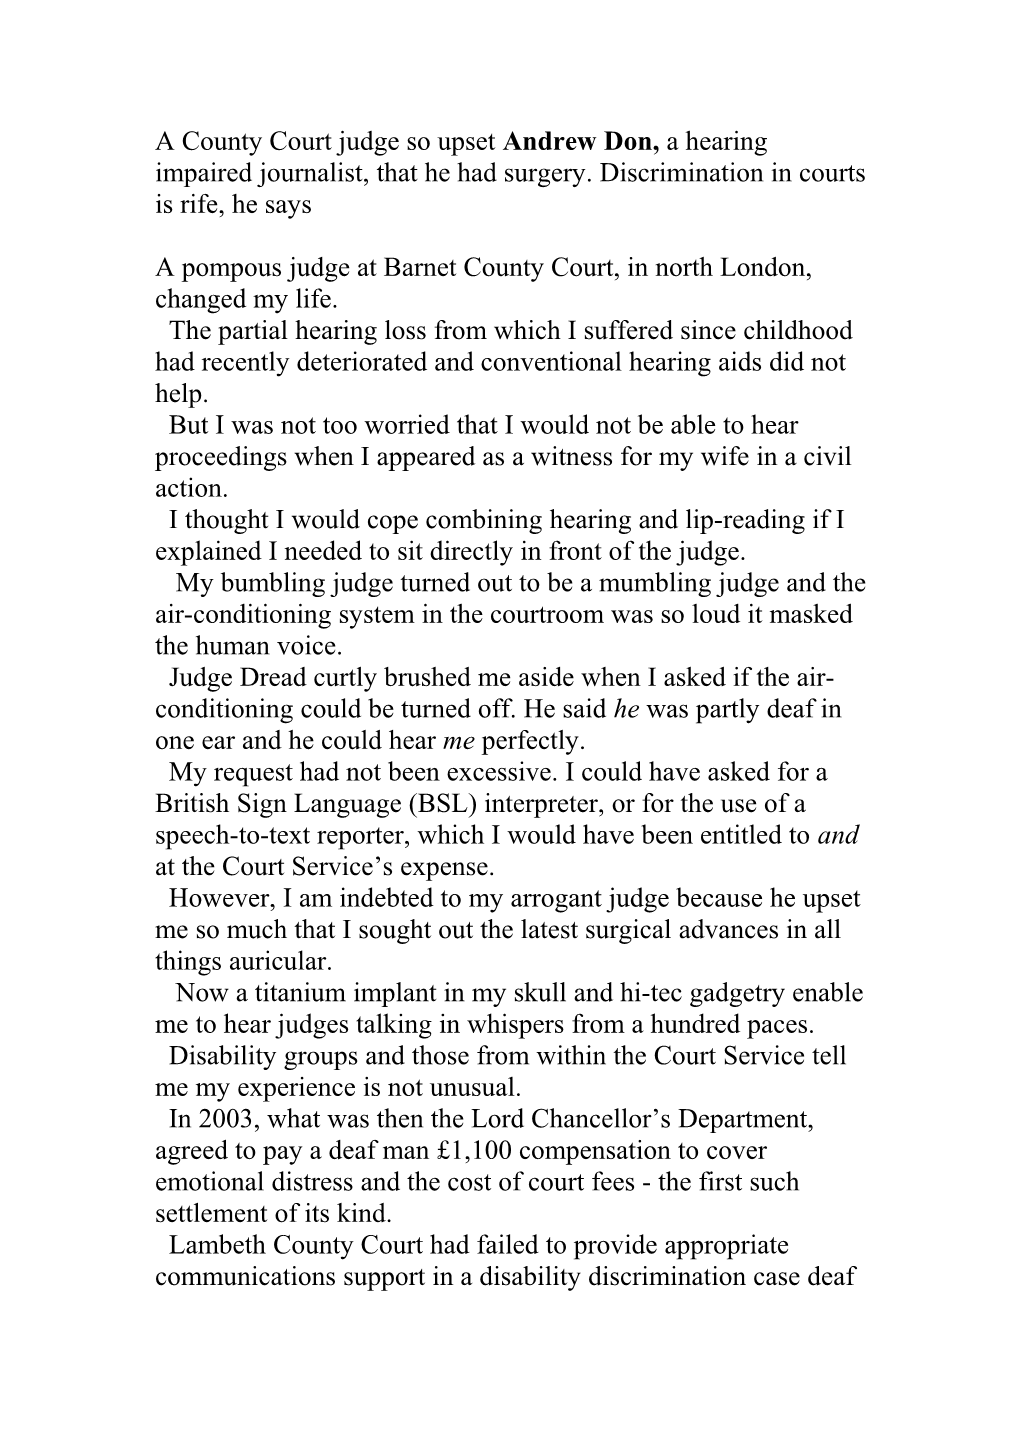 A County Court Judge So Upset Andrew Don, a Hearing Impaired Journalist, That He Had Surgery